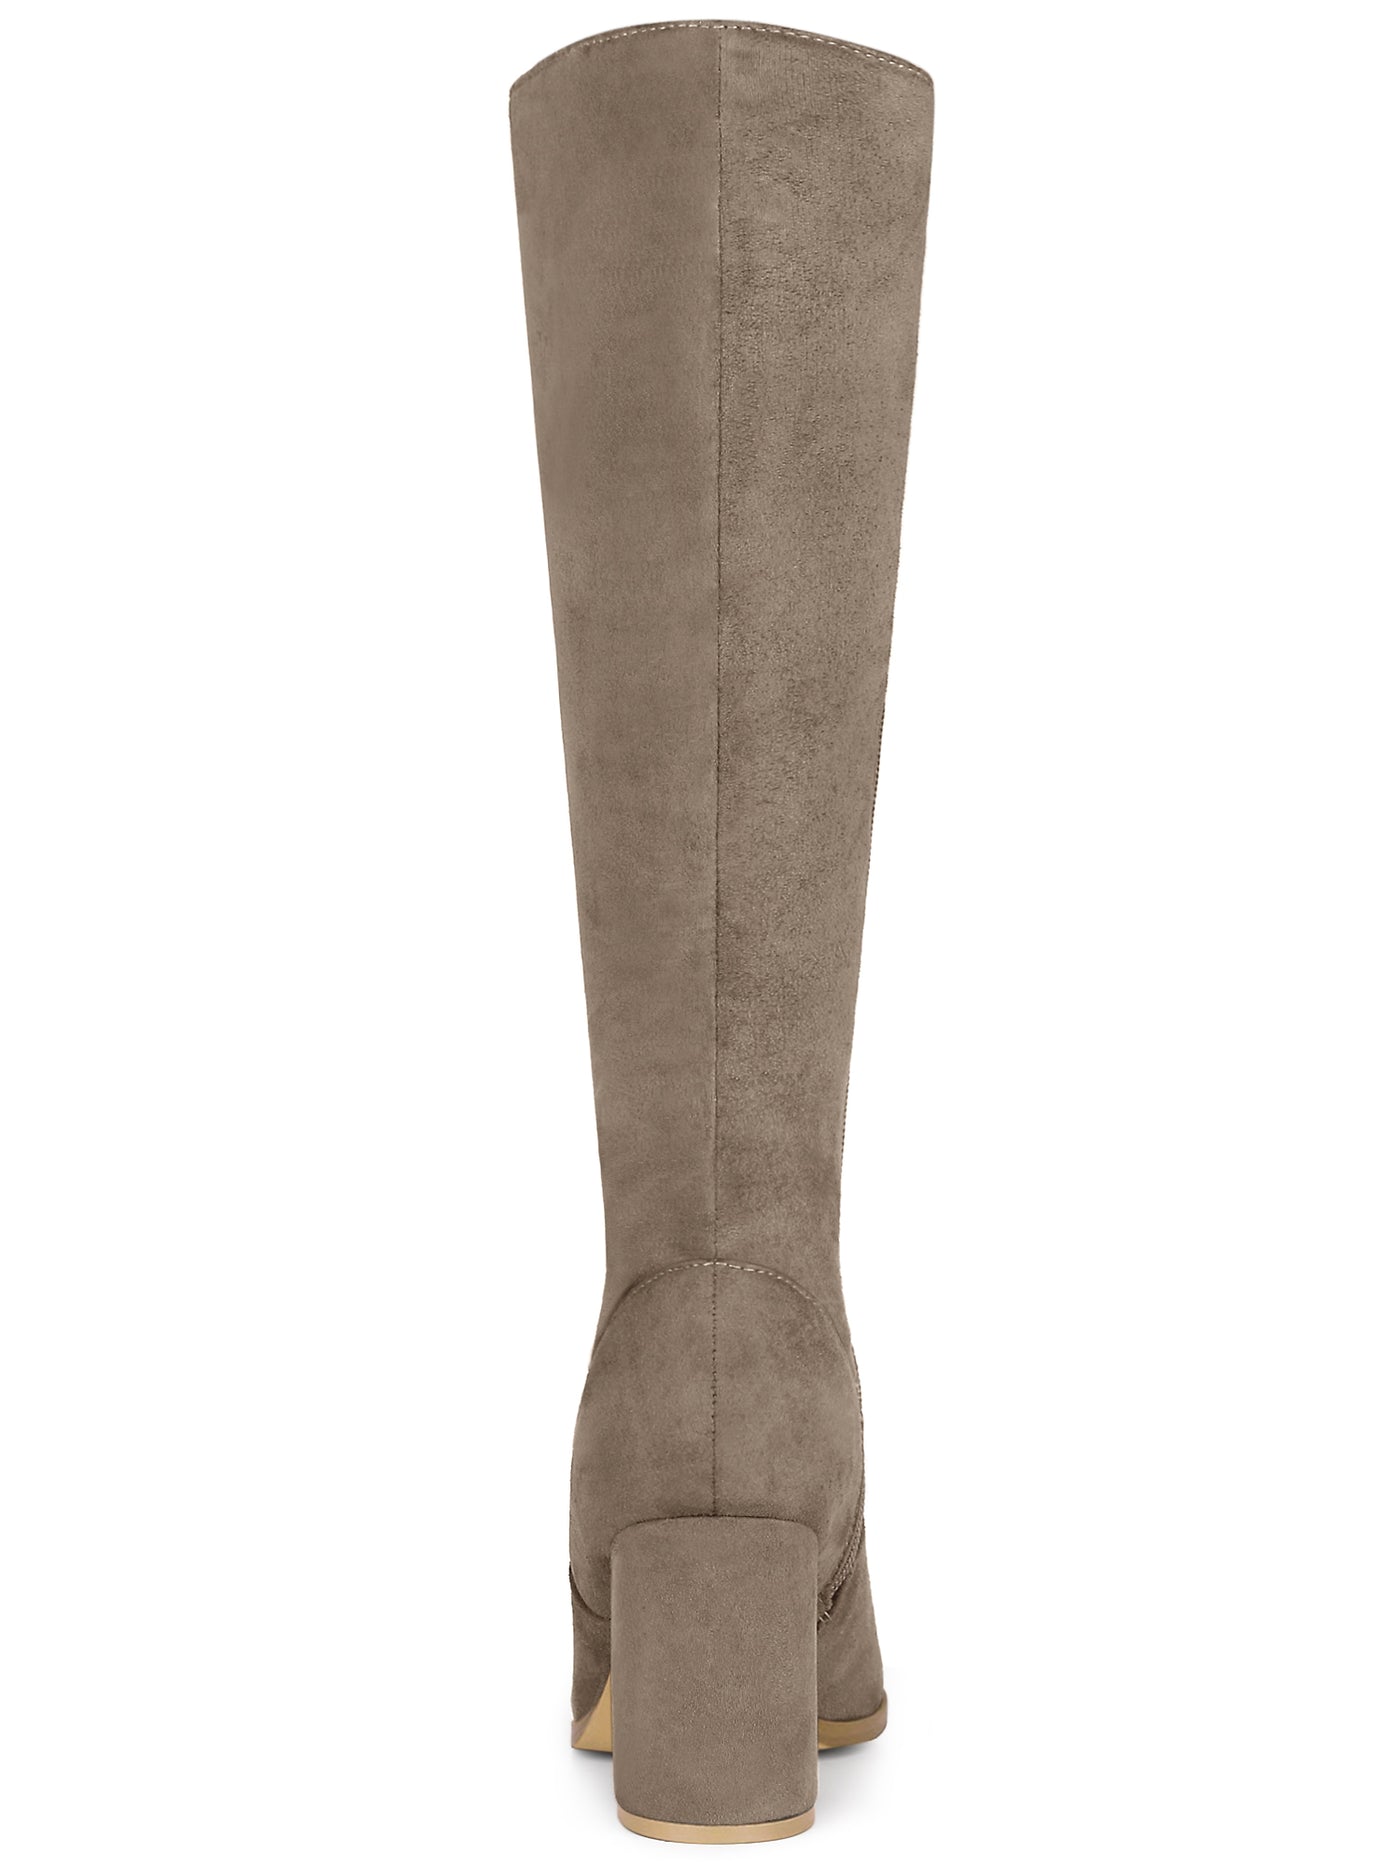 Bublédon Perphy Women's Round Toe Chunky Heels Knee High Boots